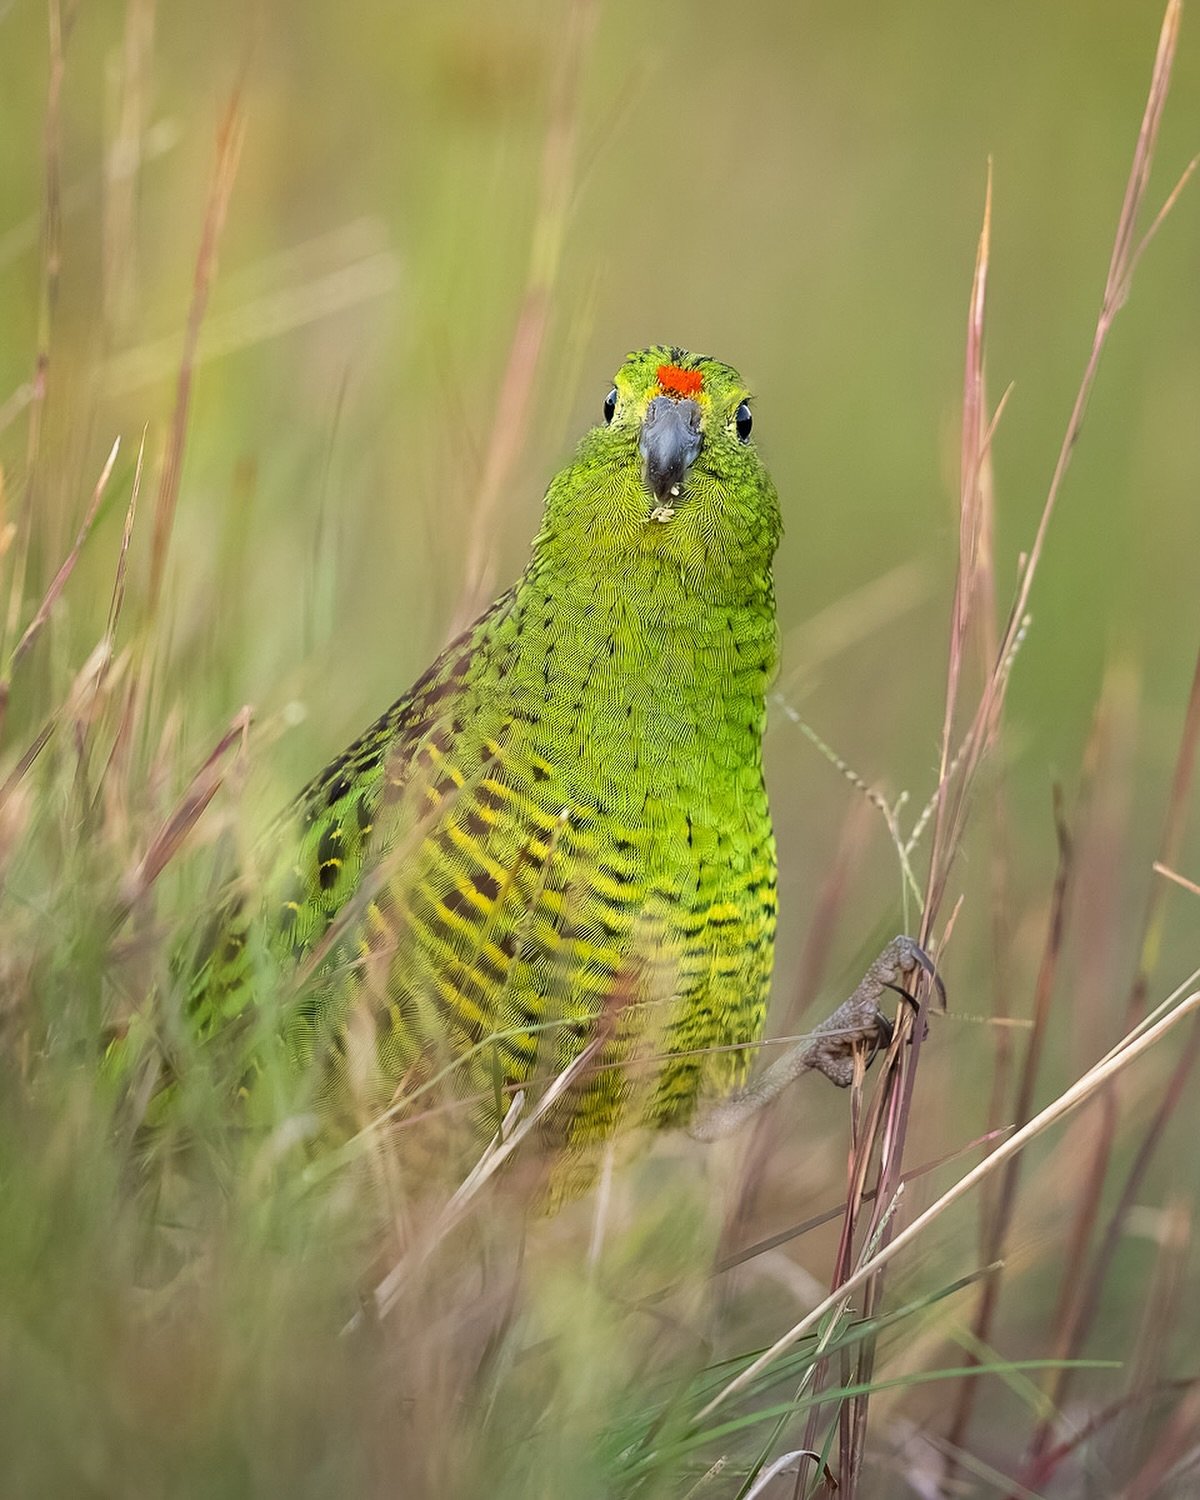 Que?
.
Another Eastern Ground Parrot from a day out with @wild_lachie recently. 
so cool being so close to these birds as the sun disappeared.
.
.
#groundparrot #easternground #davidstowephotography #planetbirds #nuts_about_birds #your_best_birds #be